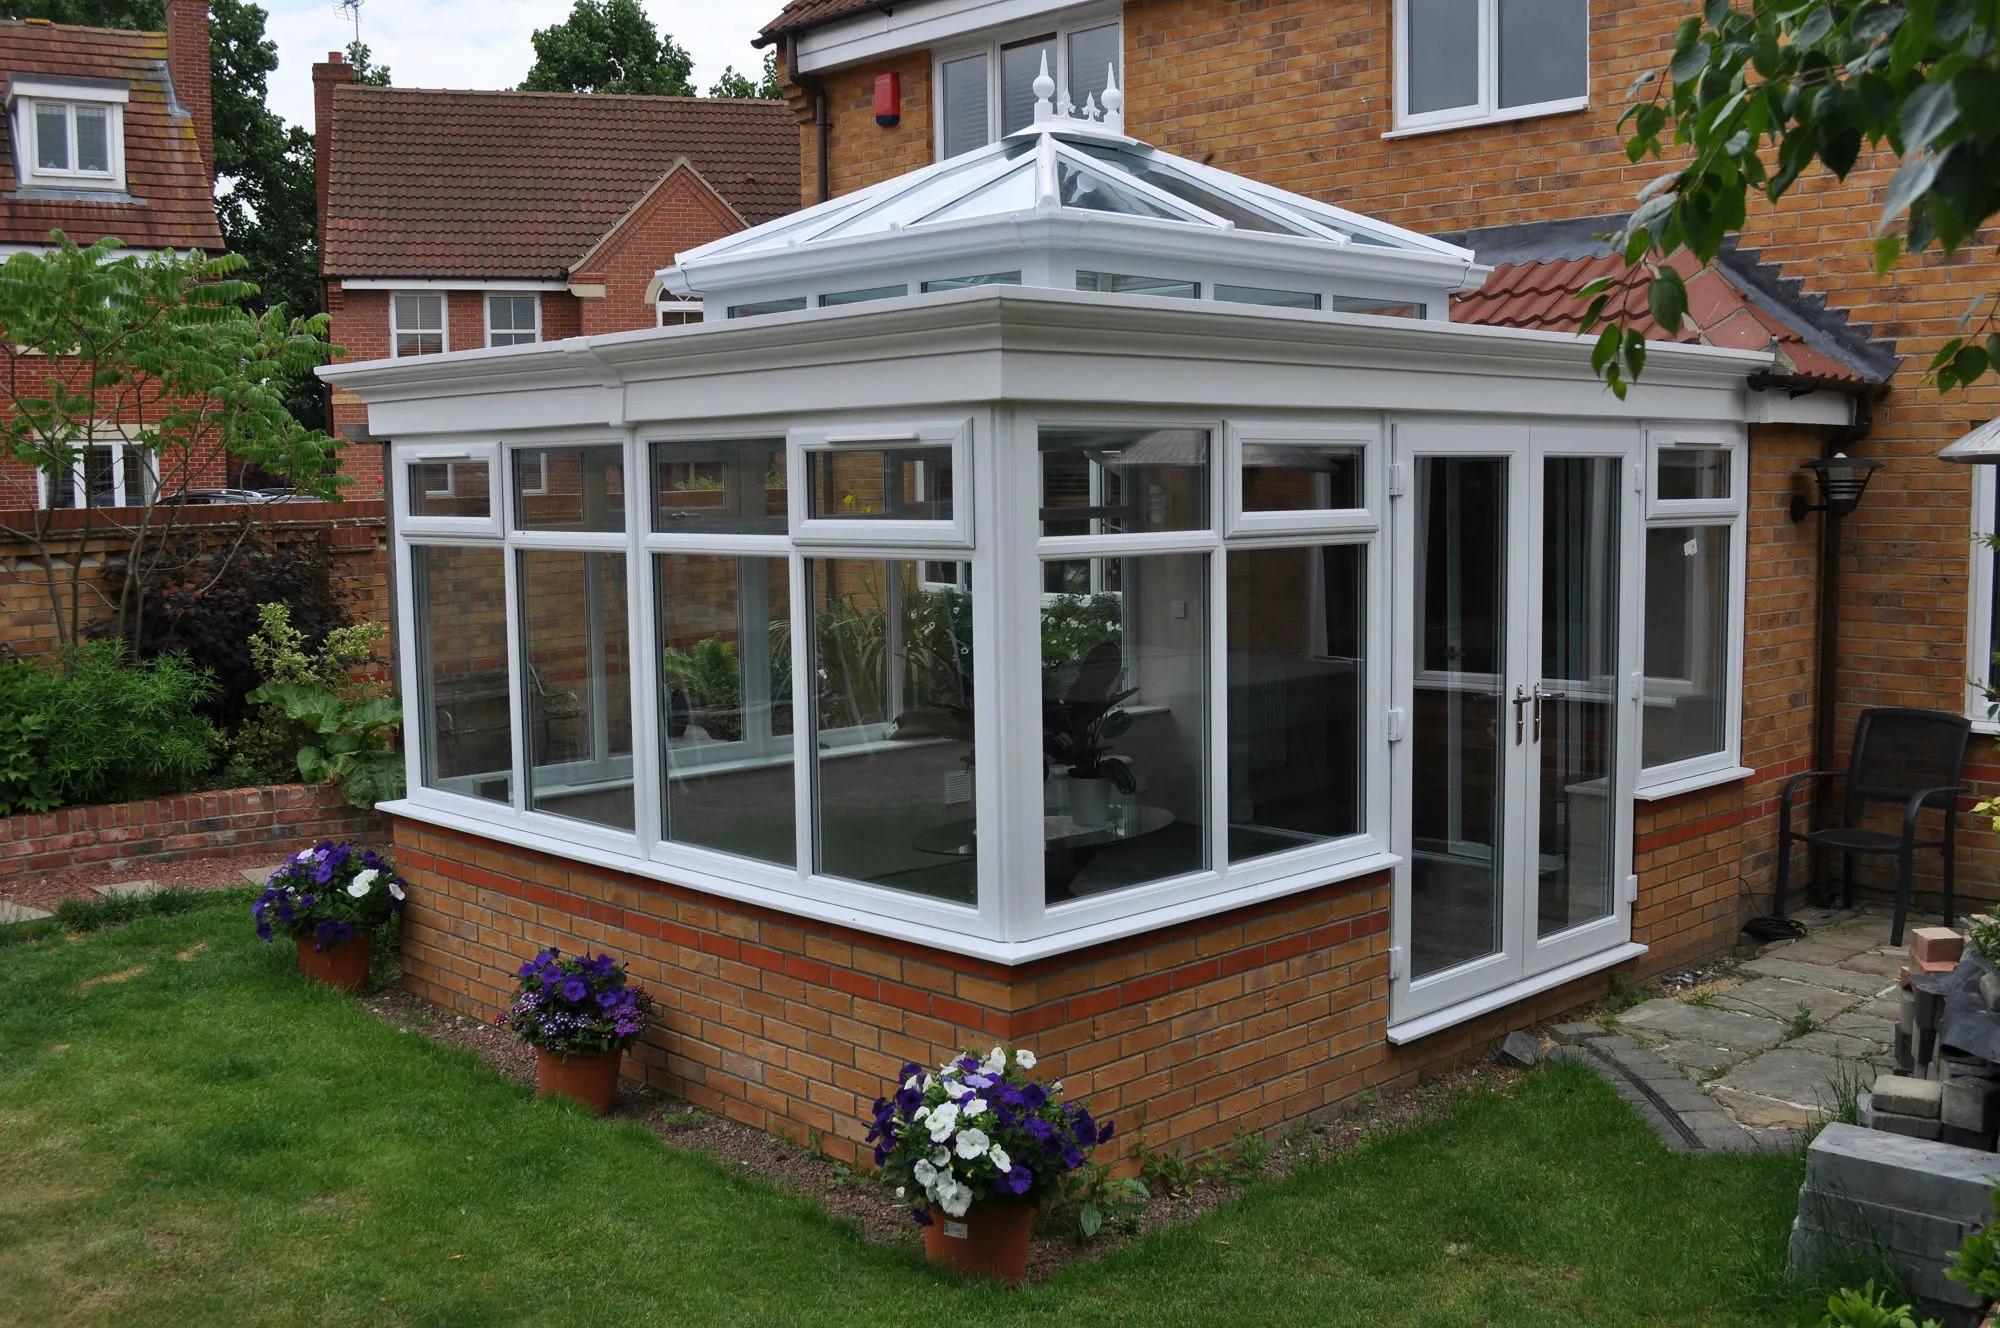 How much do orangeries cost? Are they good value for money?